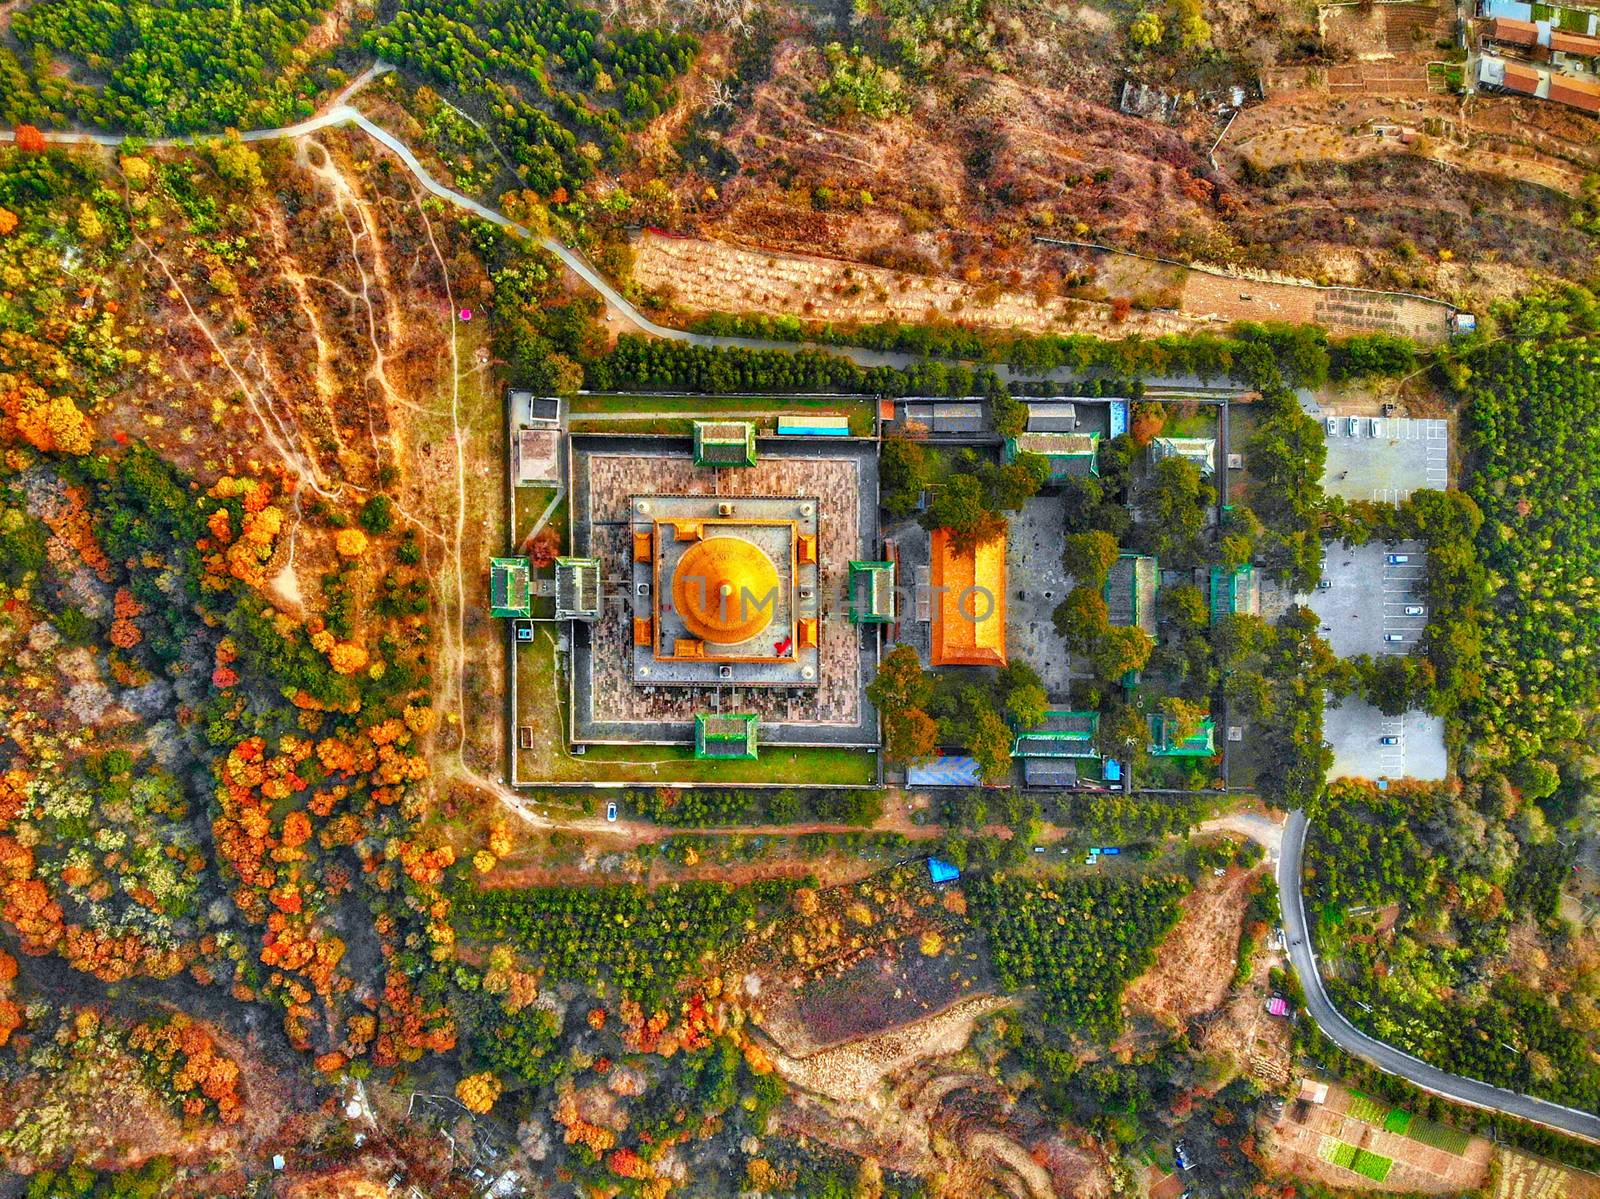 Aerial view of The Temple of Universal Happiness, Pule si, also called the round Pavillion, this structure was built in 1766. Little temple at the starting point for hammer rock hike, Chengde, China.